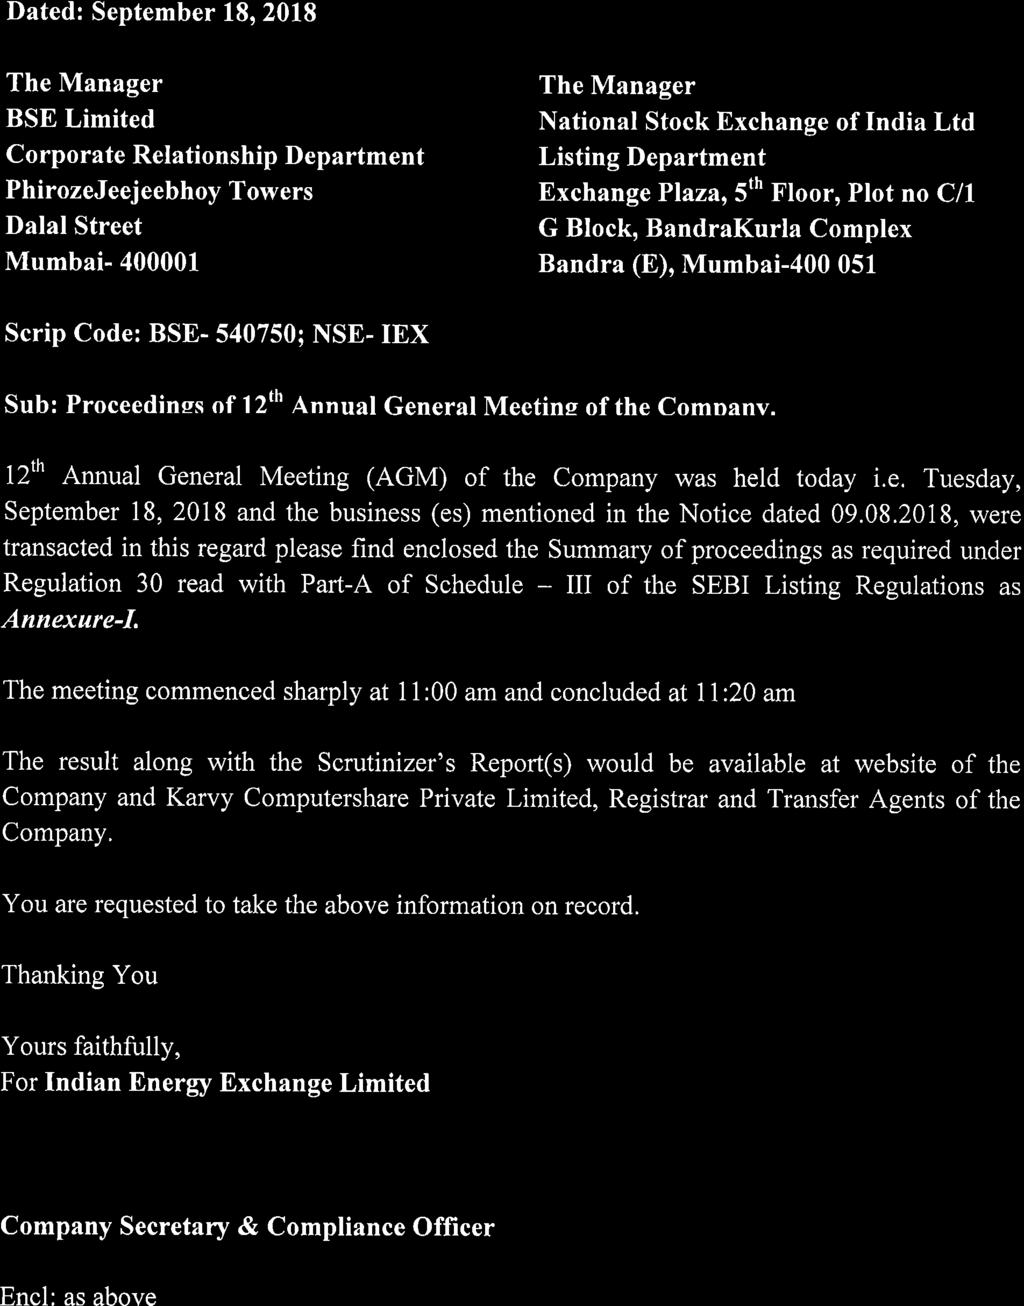 of the Company. 12th Annual General Meeting (AGM) of the Company was held today i.e. Tuesday, September 18, 2018 and the business (es) mentioned in the Notice dated 09.08.